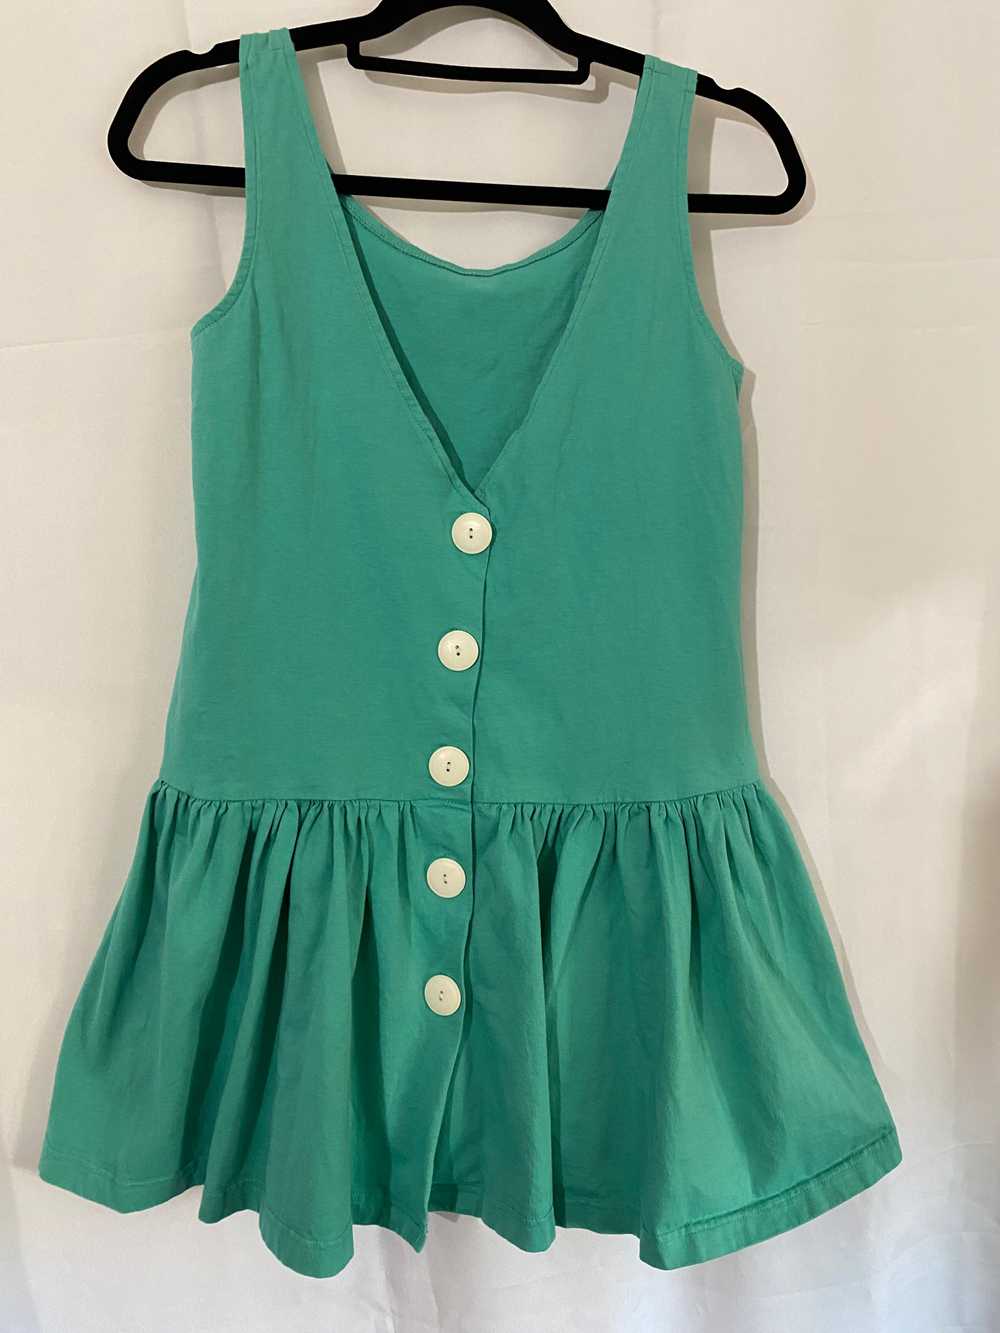 1990's Turquoise Dress with White Buttons - image 2